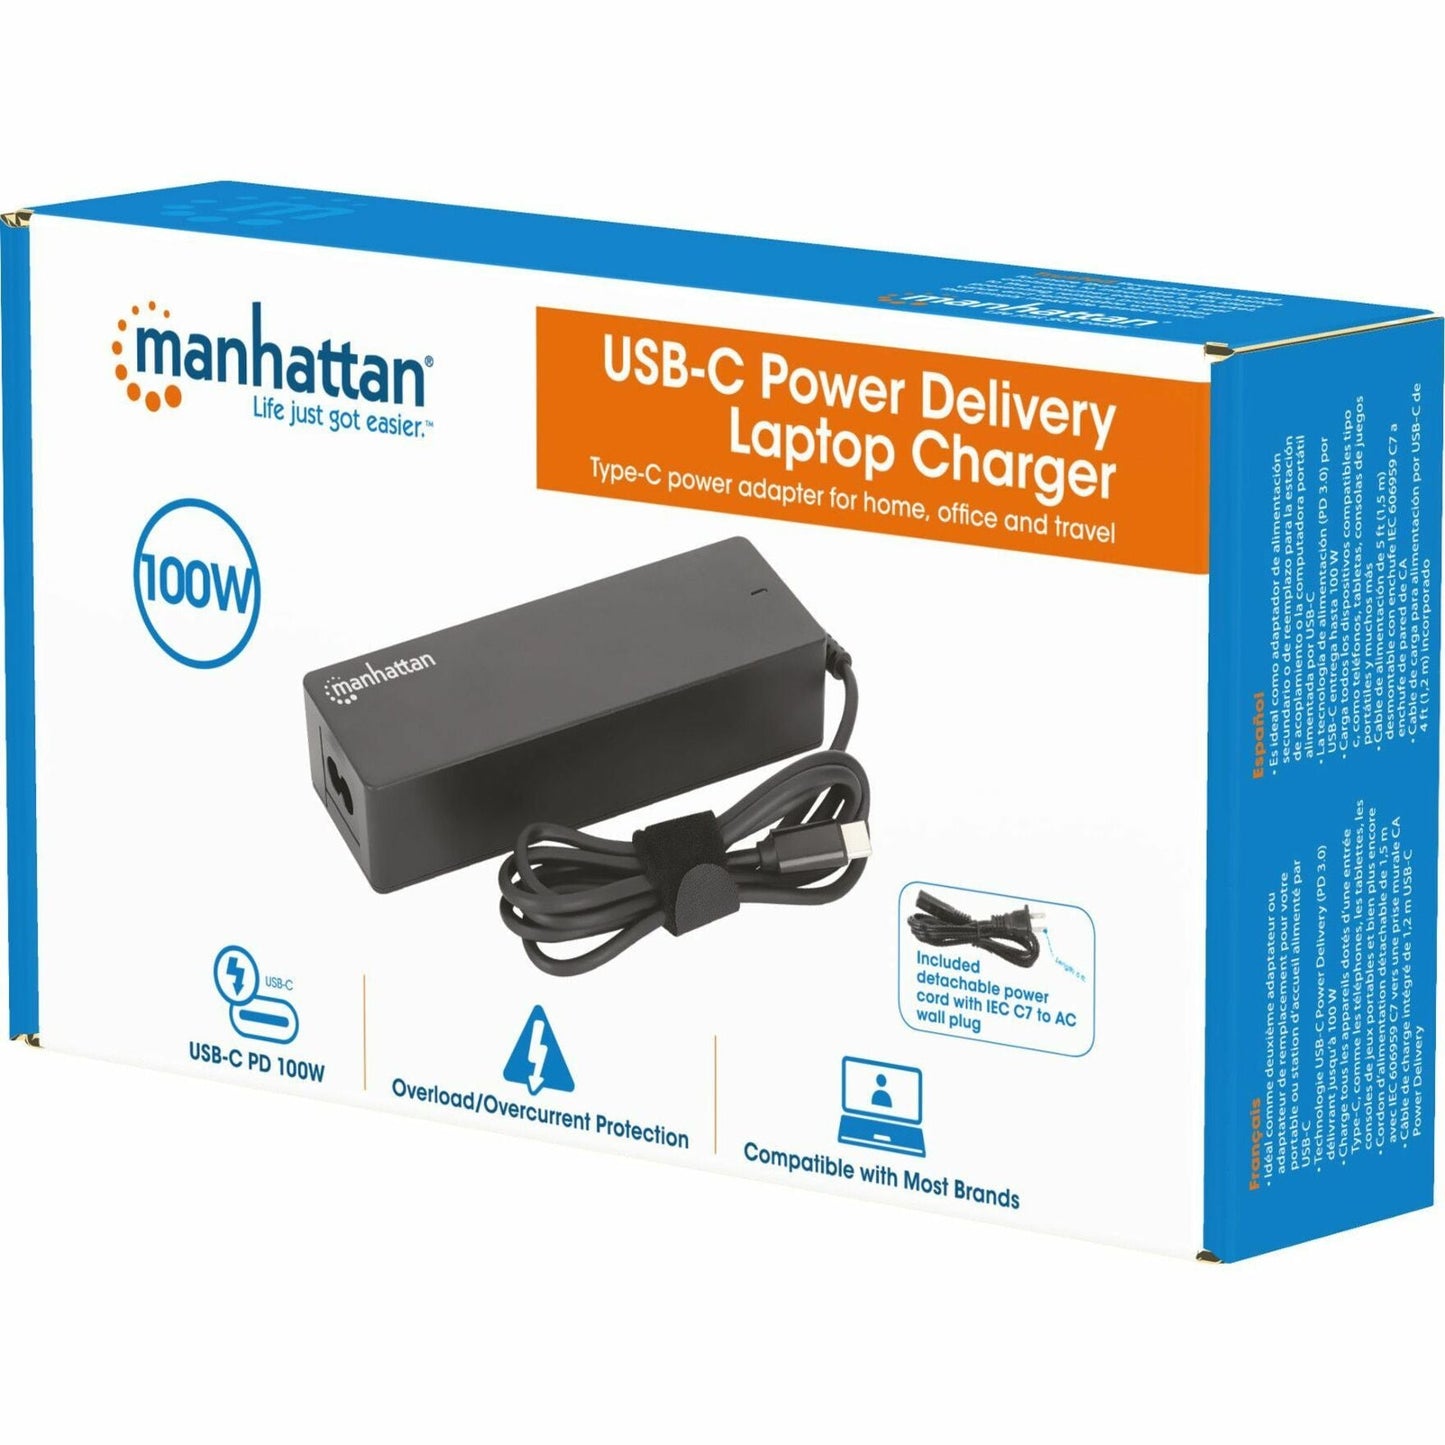 Manhattan USB-C Power Delivery Laptop Charger - 100 W